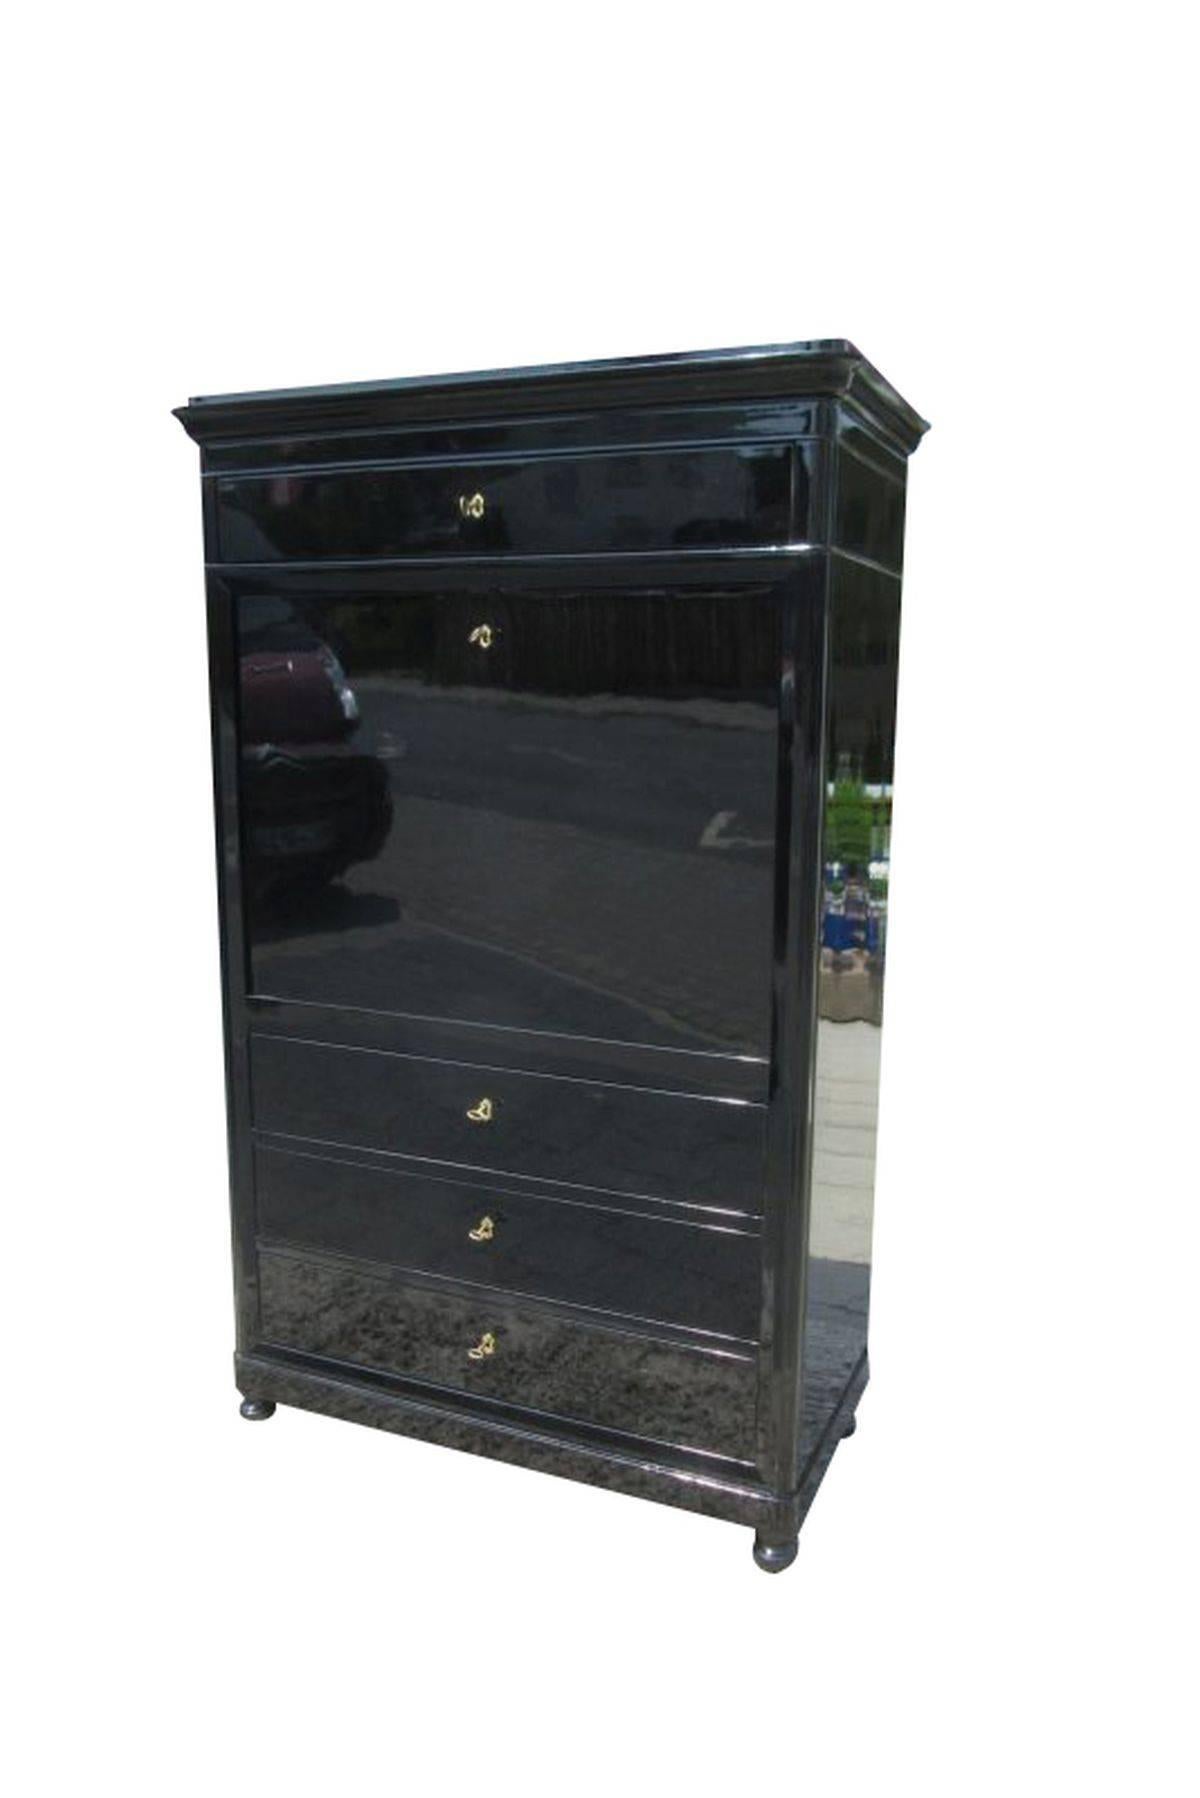 A black secretaire from the Biedermeier period. This unique looking piece is coated with a black lacquer. The cabinet is veneered with cherrywood and has seven drawers and a big free compartment. The secretaire has four additional drawers outside